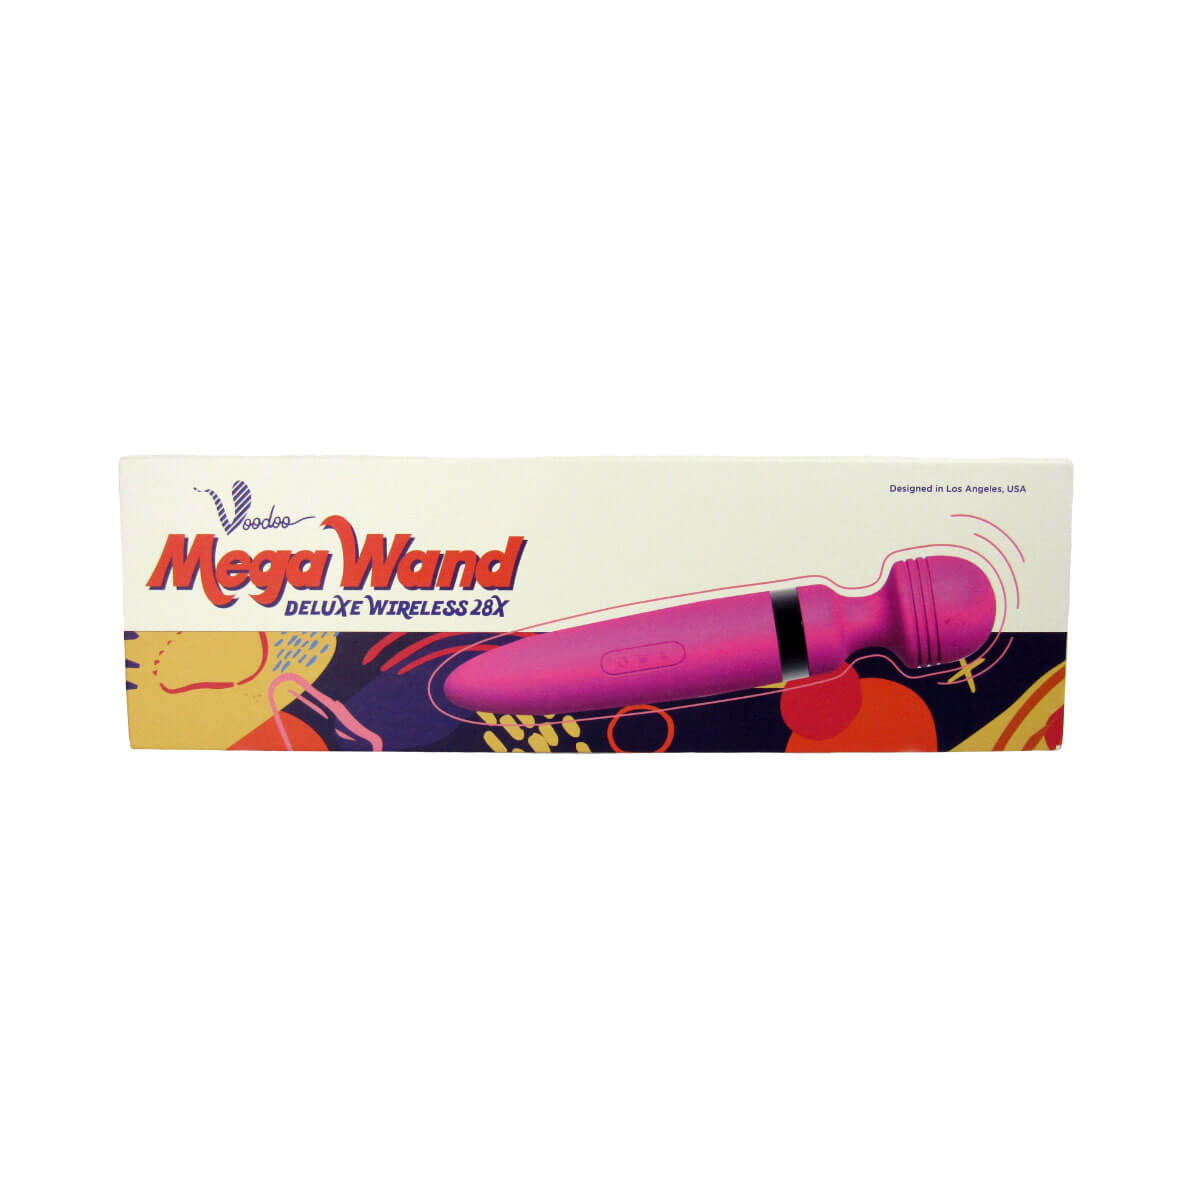 Voodoo Deluxe Mega Wireless Wand 28X packaging- by The Bigger O online sex toys shop. USA, Canada and UK shipping available.